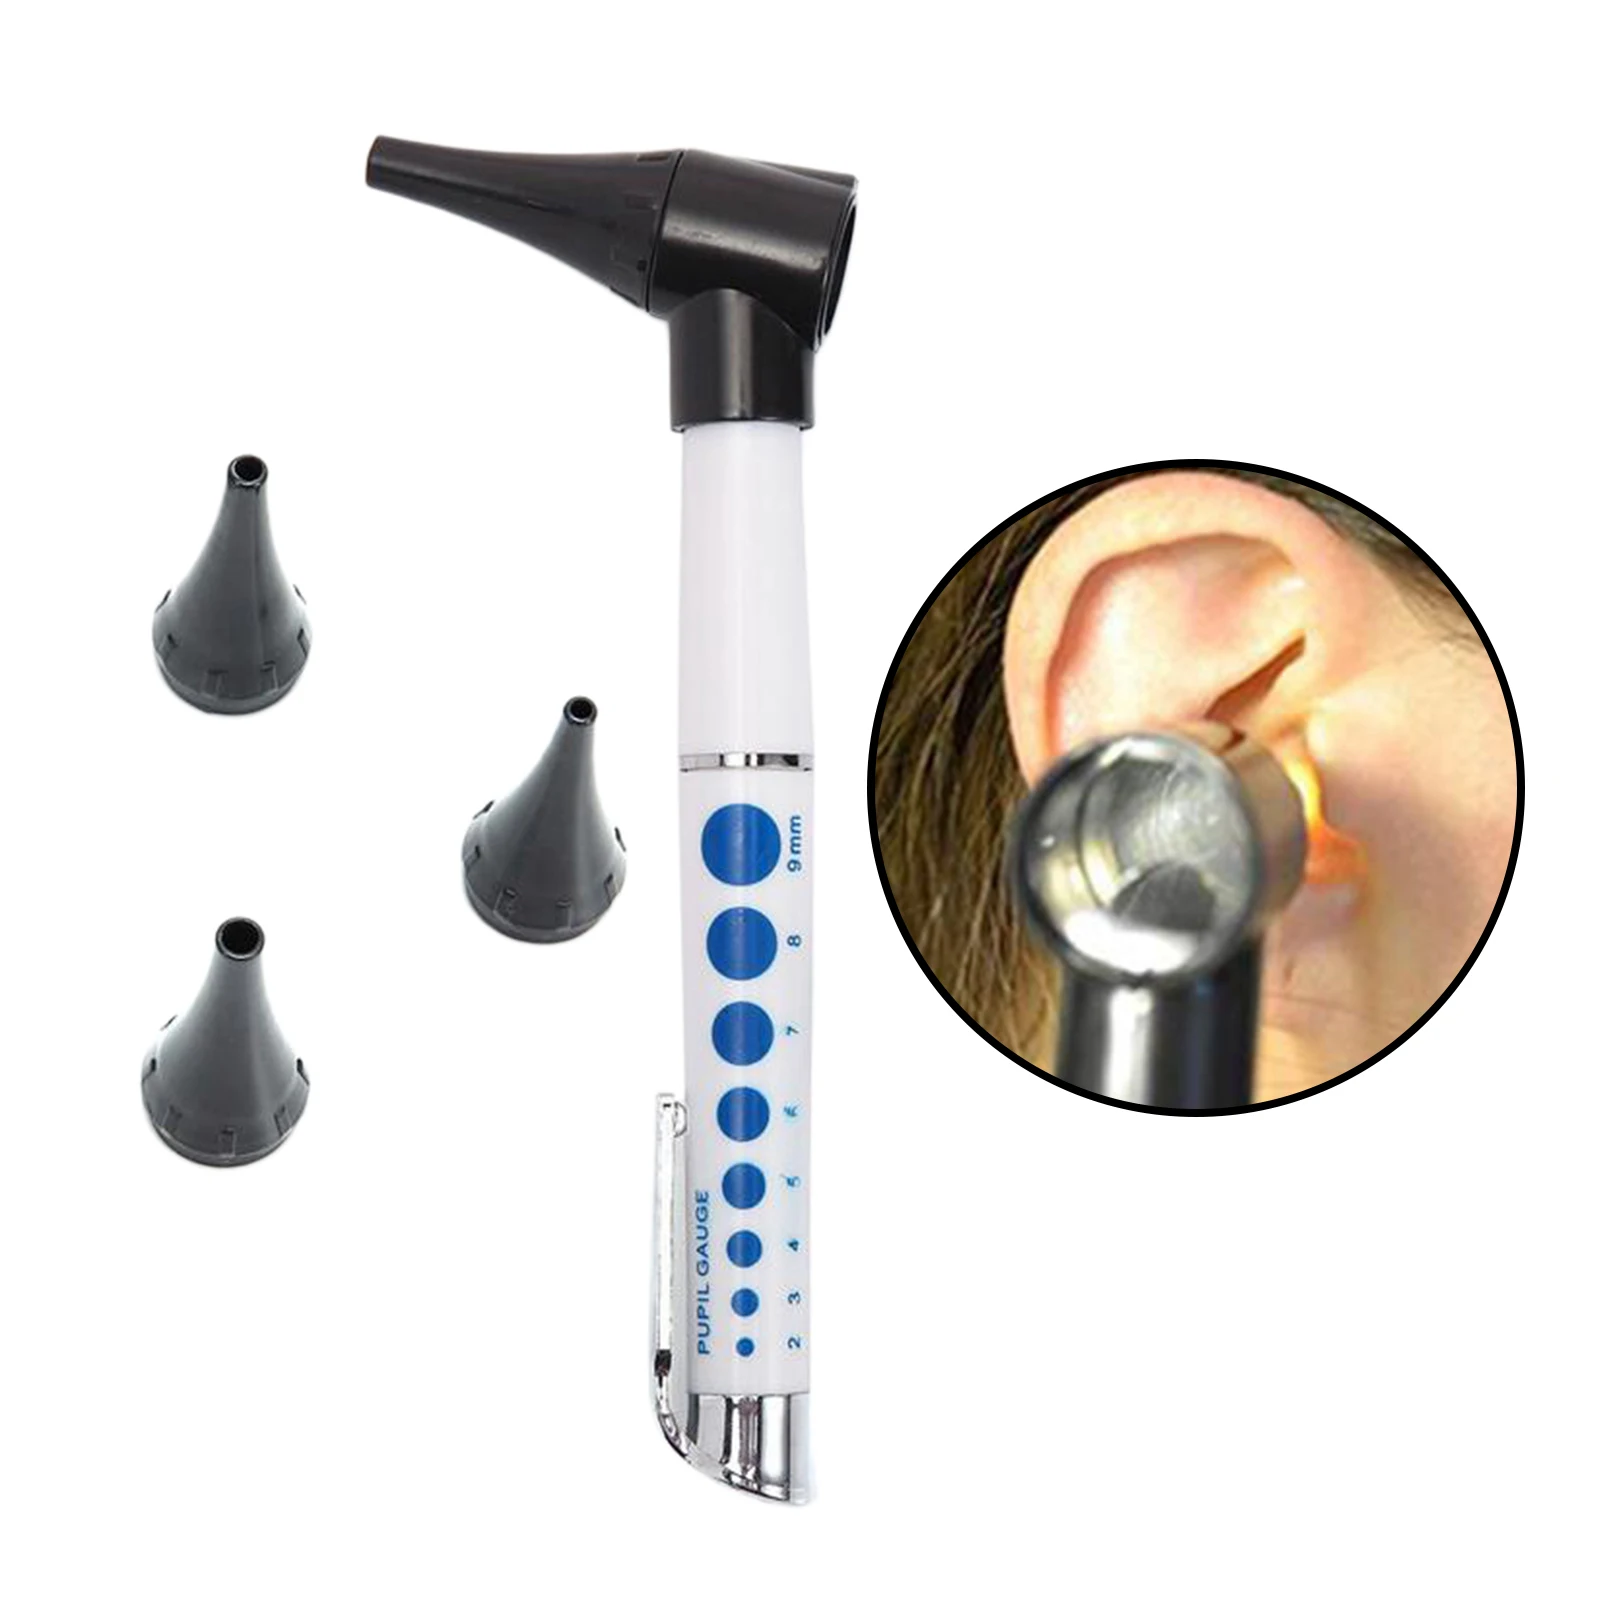 White Professional Mini Clinical Diagnostic Otoscope Ophthalmoscope Instruments Ear Light Ear Magnifier Set New